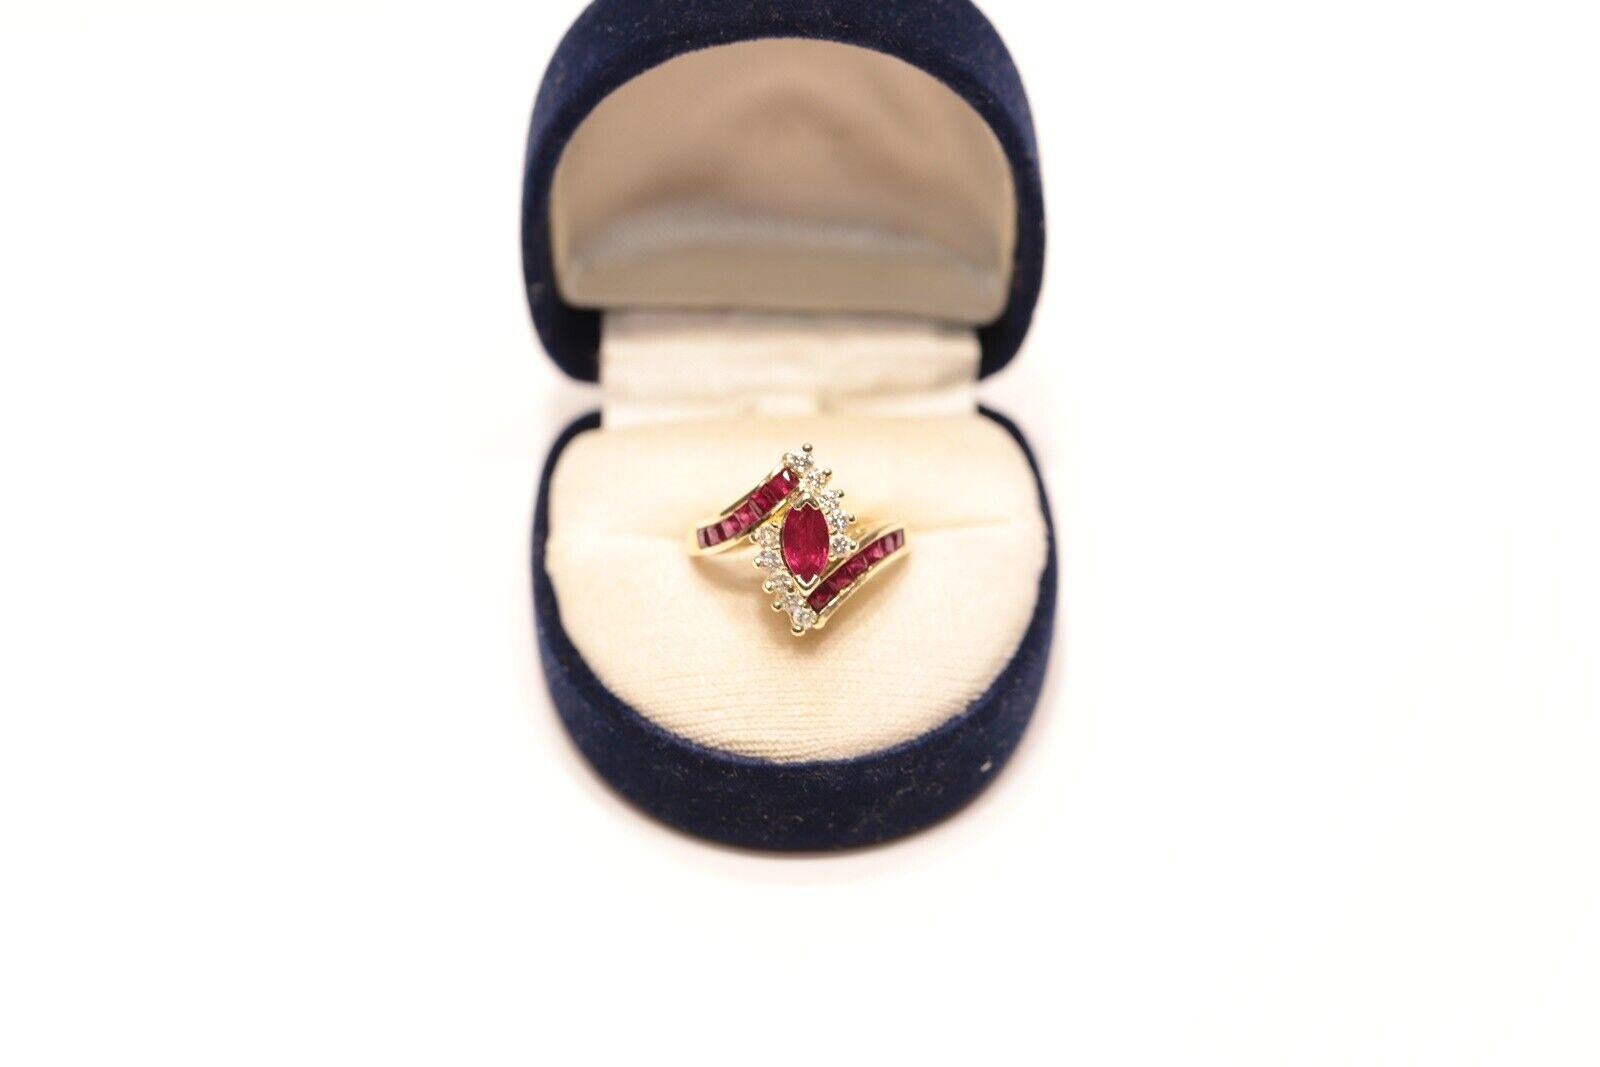 In very good condition.
Total weight 4.9 grams.
Total weight diamond about 0.45 carat.
The diamond has vs clarity and G color.
Total about 0.90 carat ruby.
Ring size is US 6.4 (We offer free resizing)
We can make any size.
Box is not